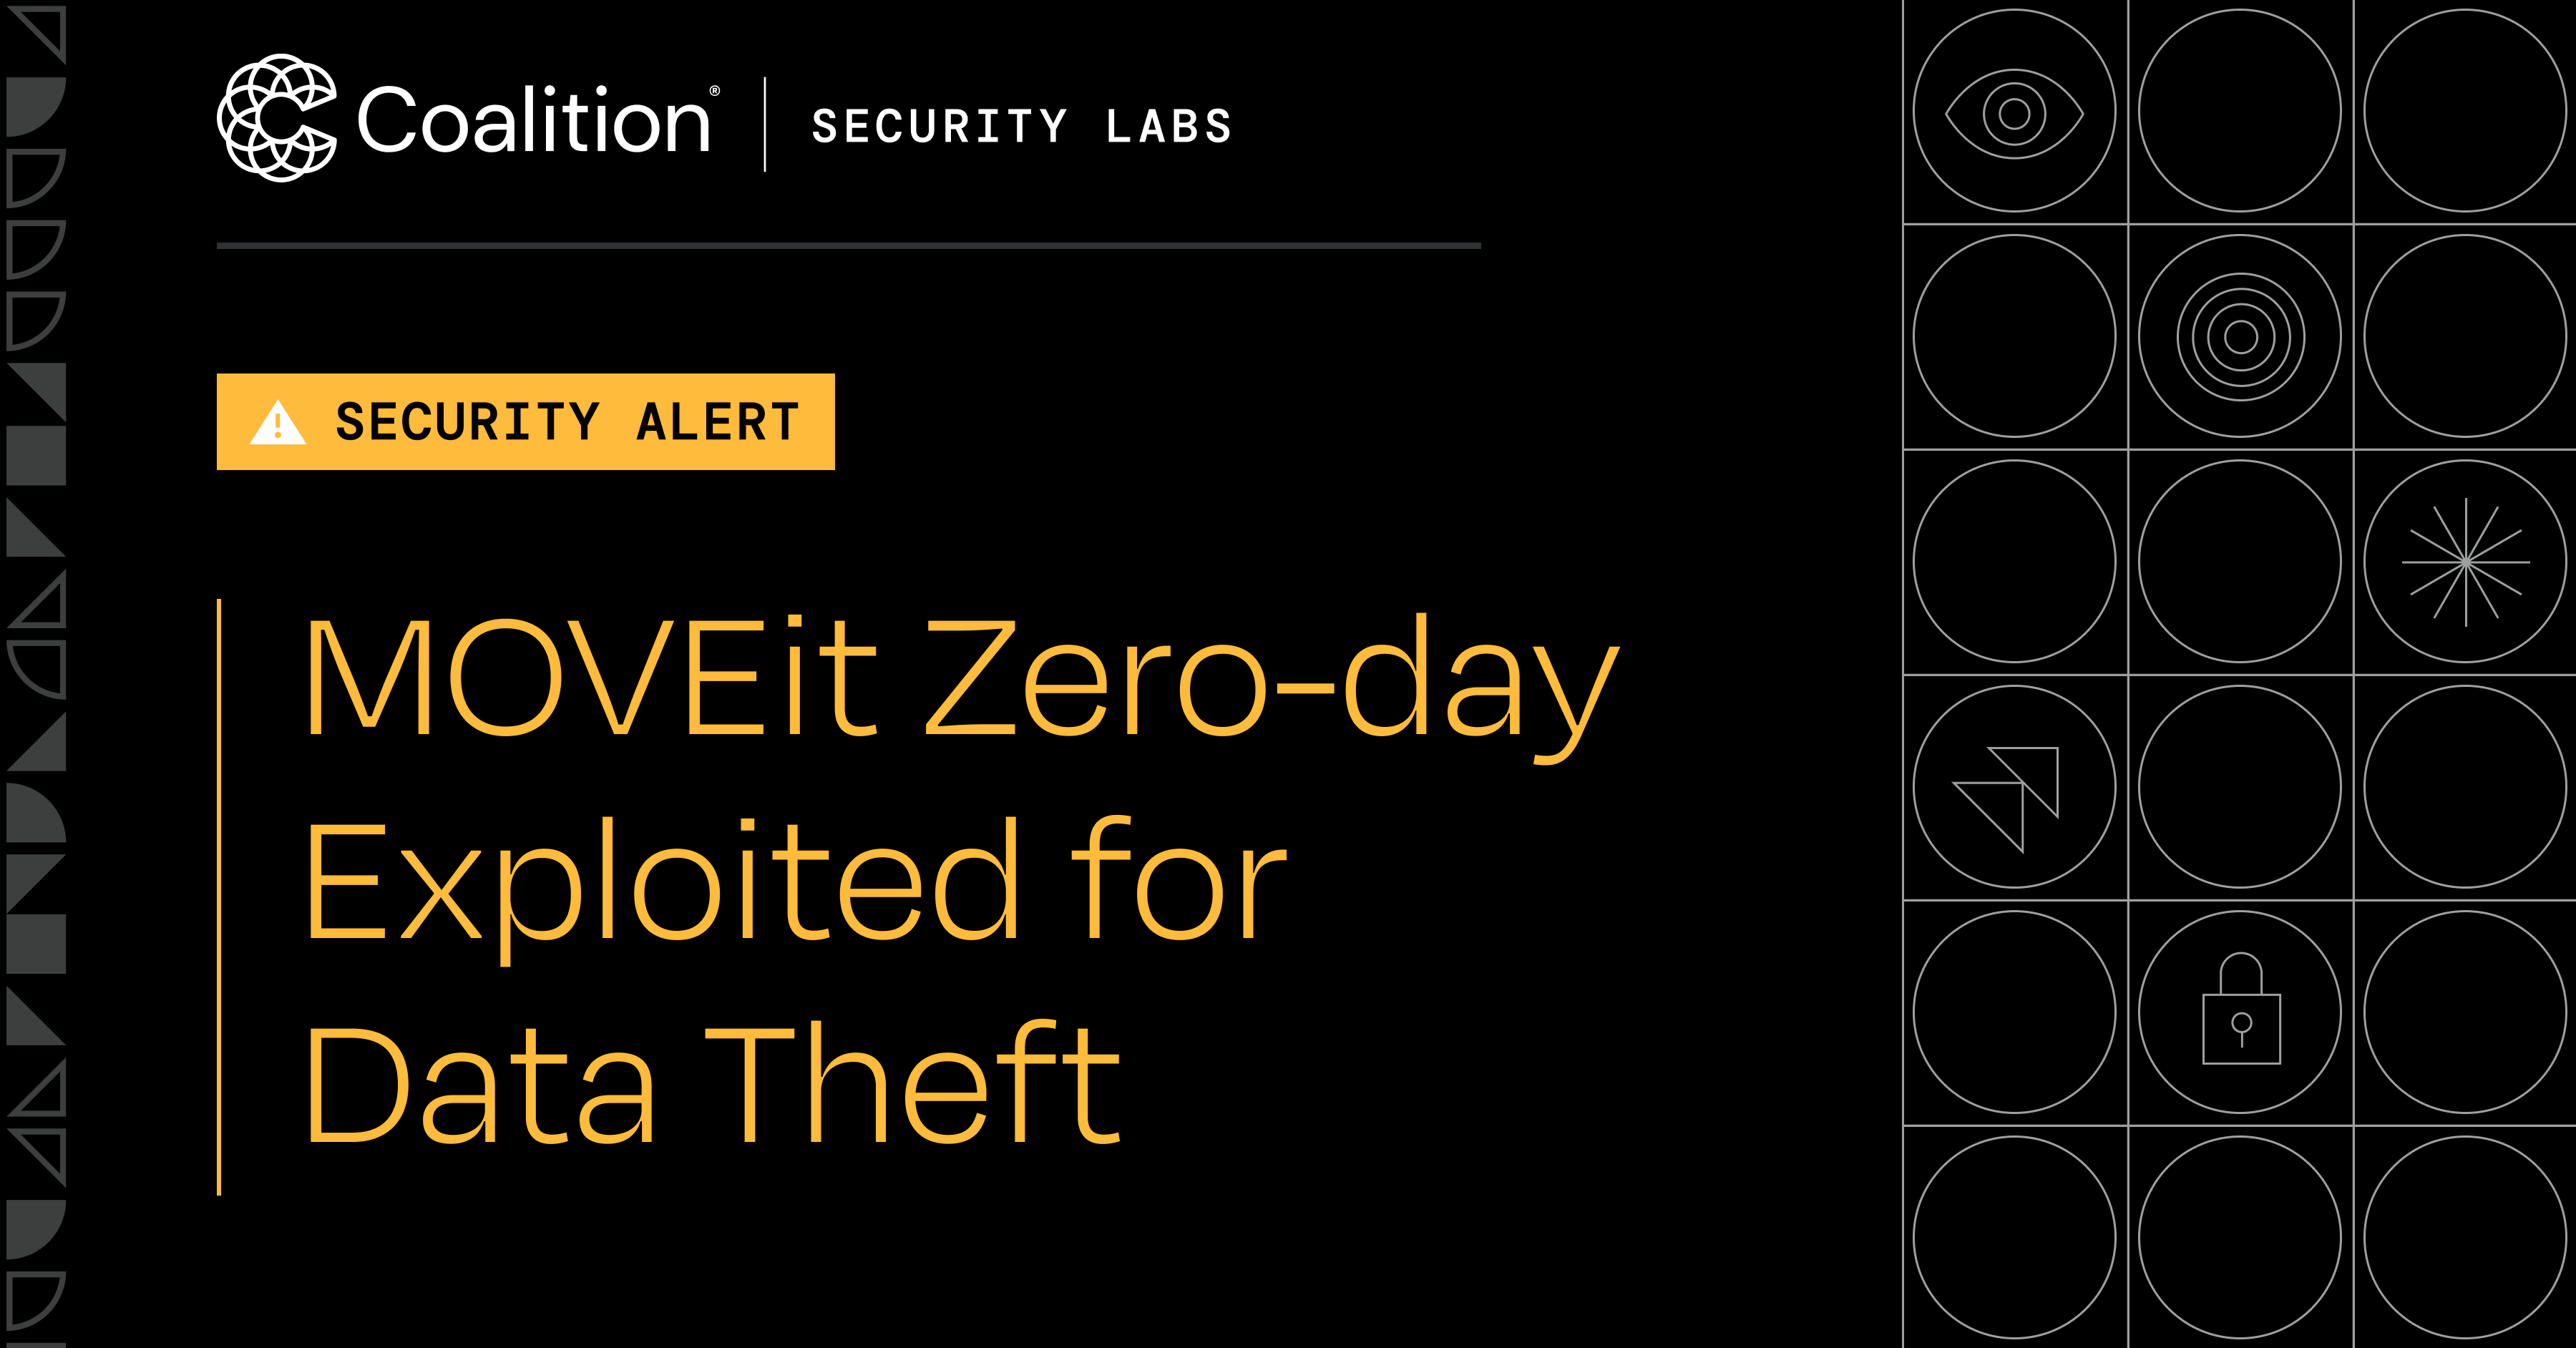 Graphic of Coalition Security Labs with copy "MOVEit Zero-day Exploited for Data Theft"